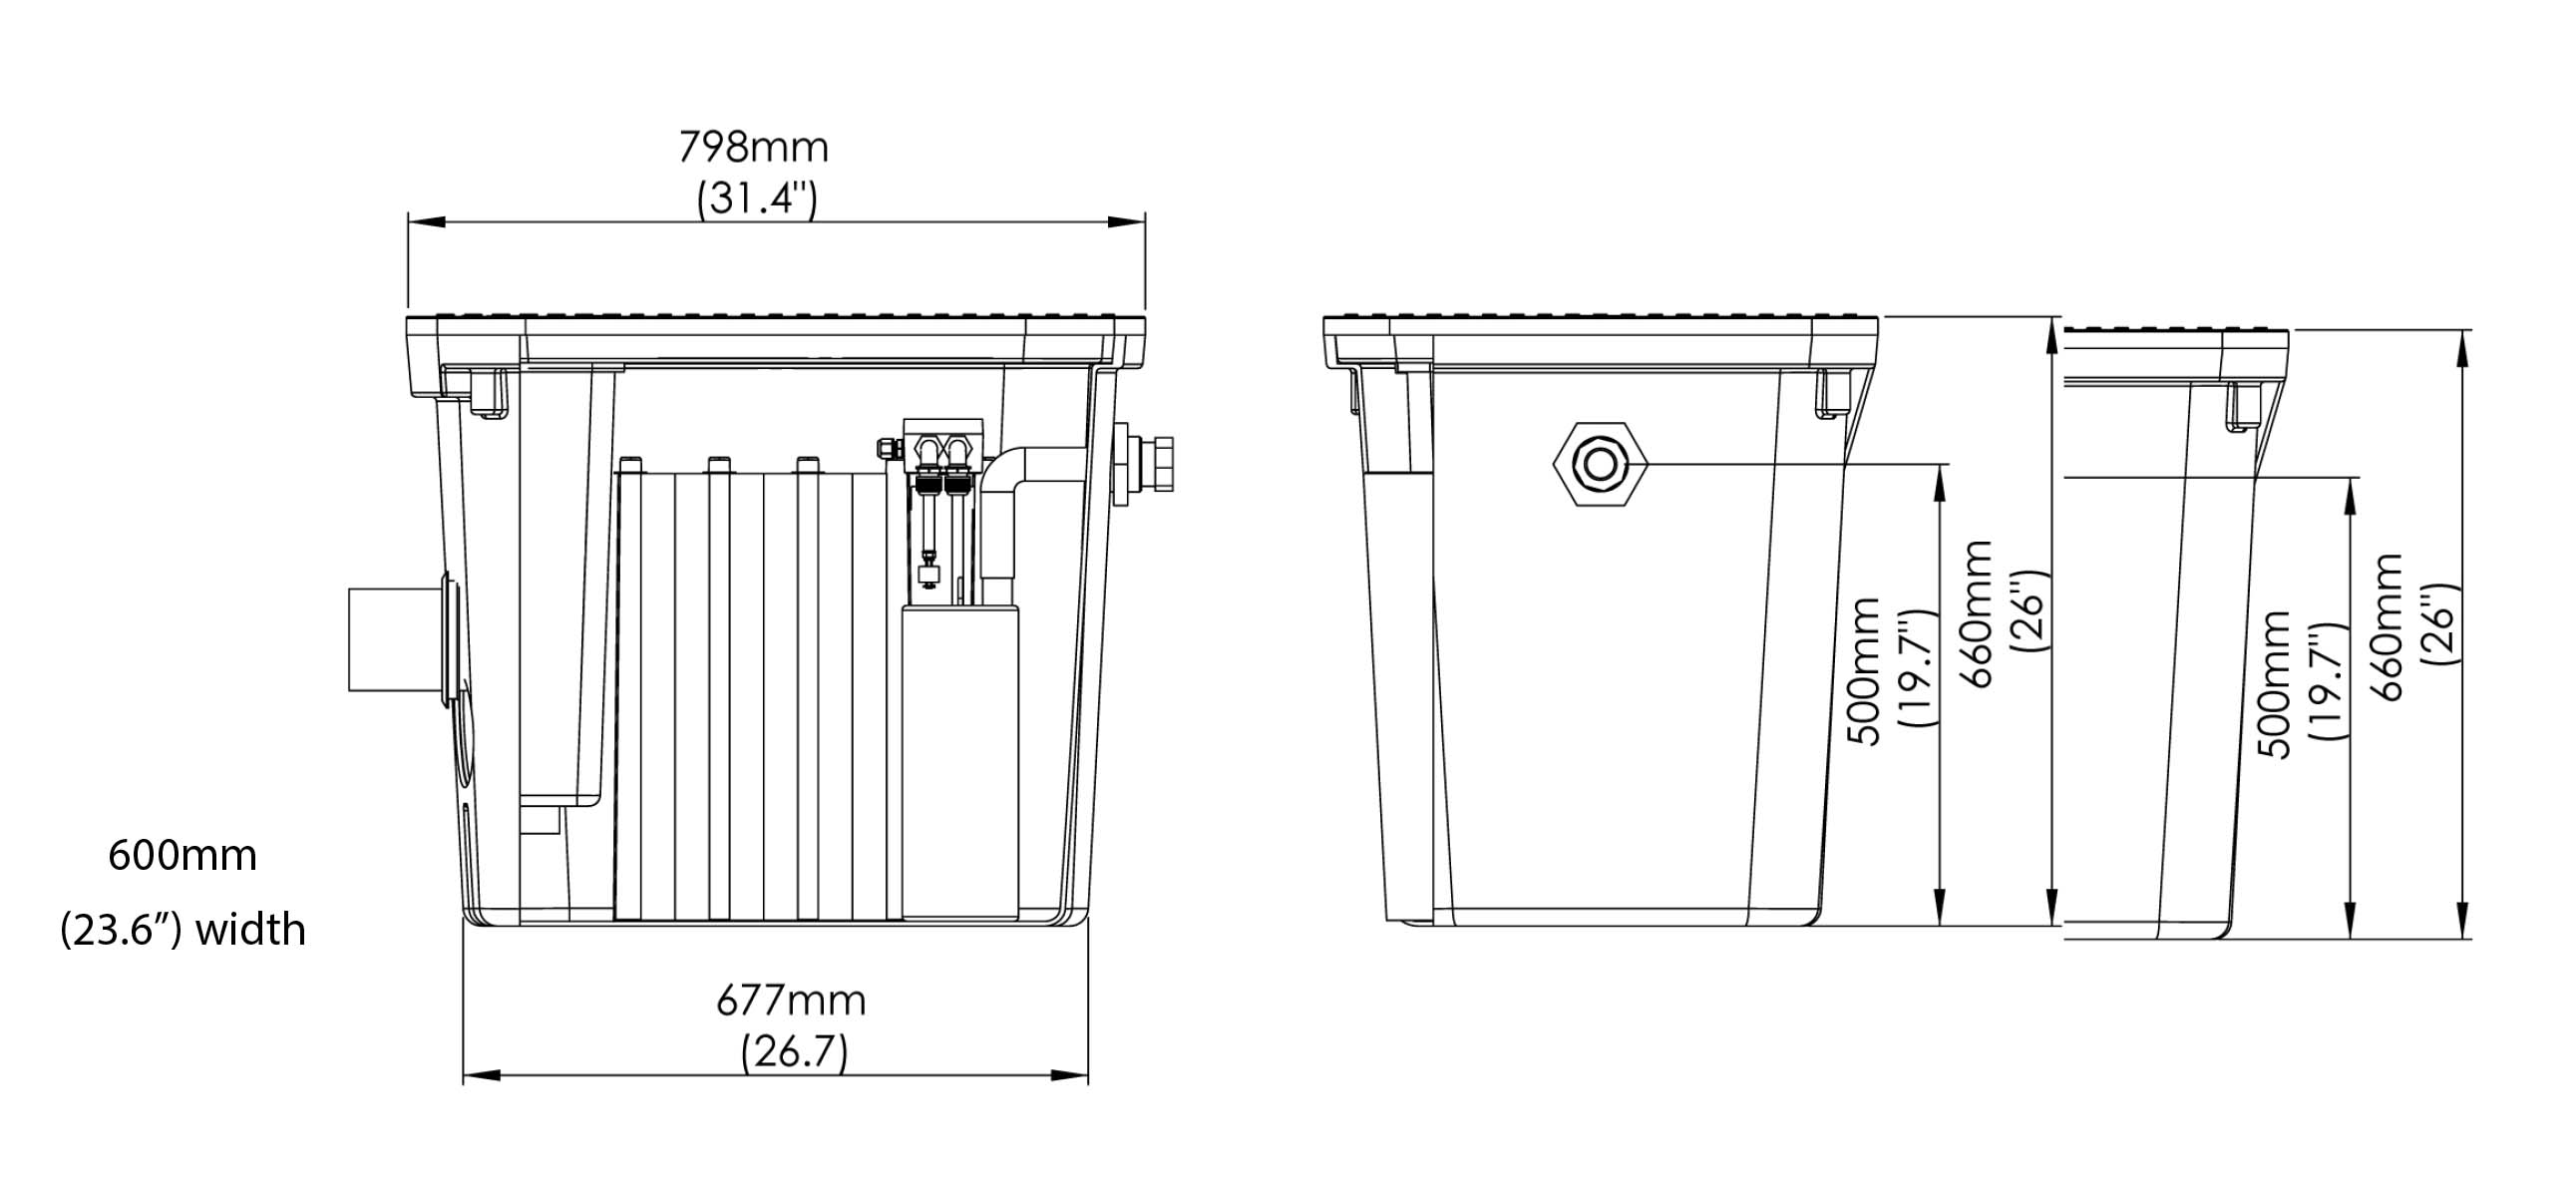 Schematic of WaterMate Greywater Recycling Unit